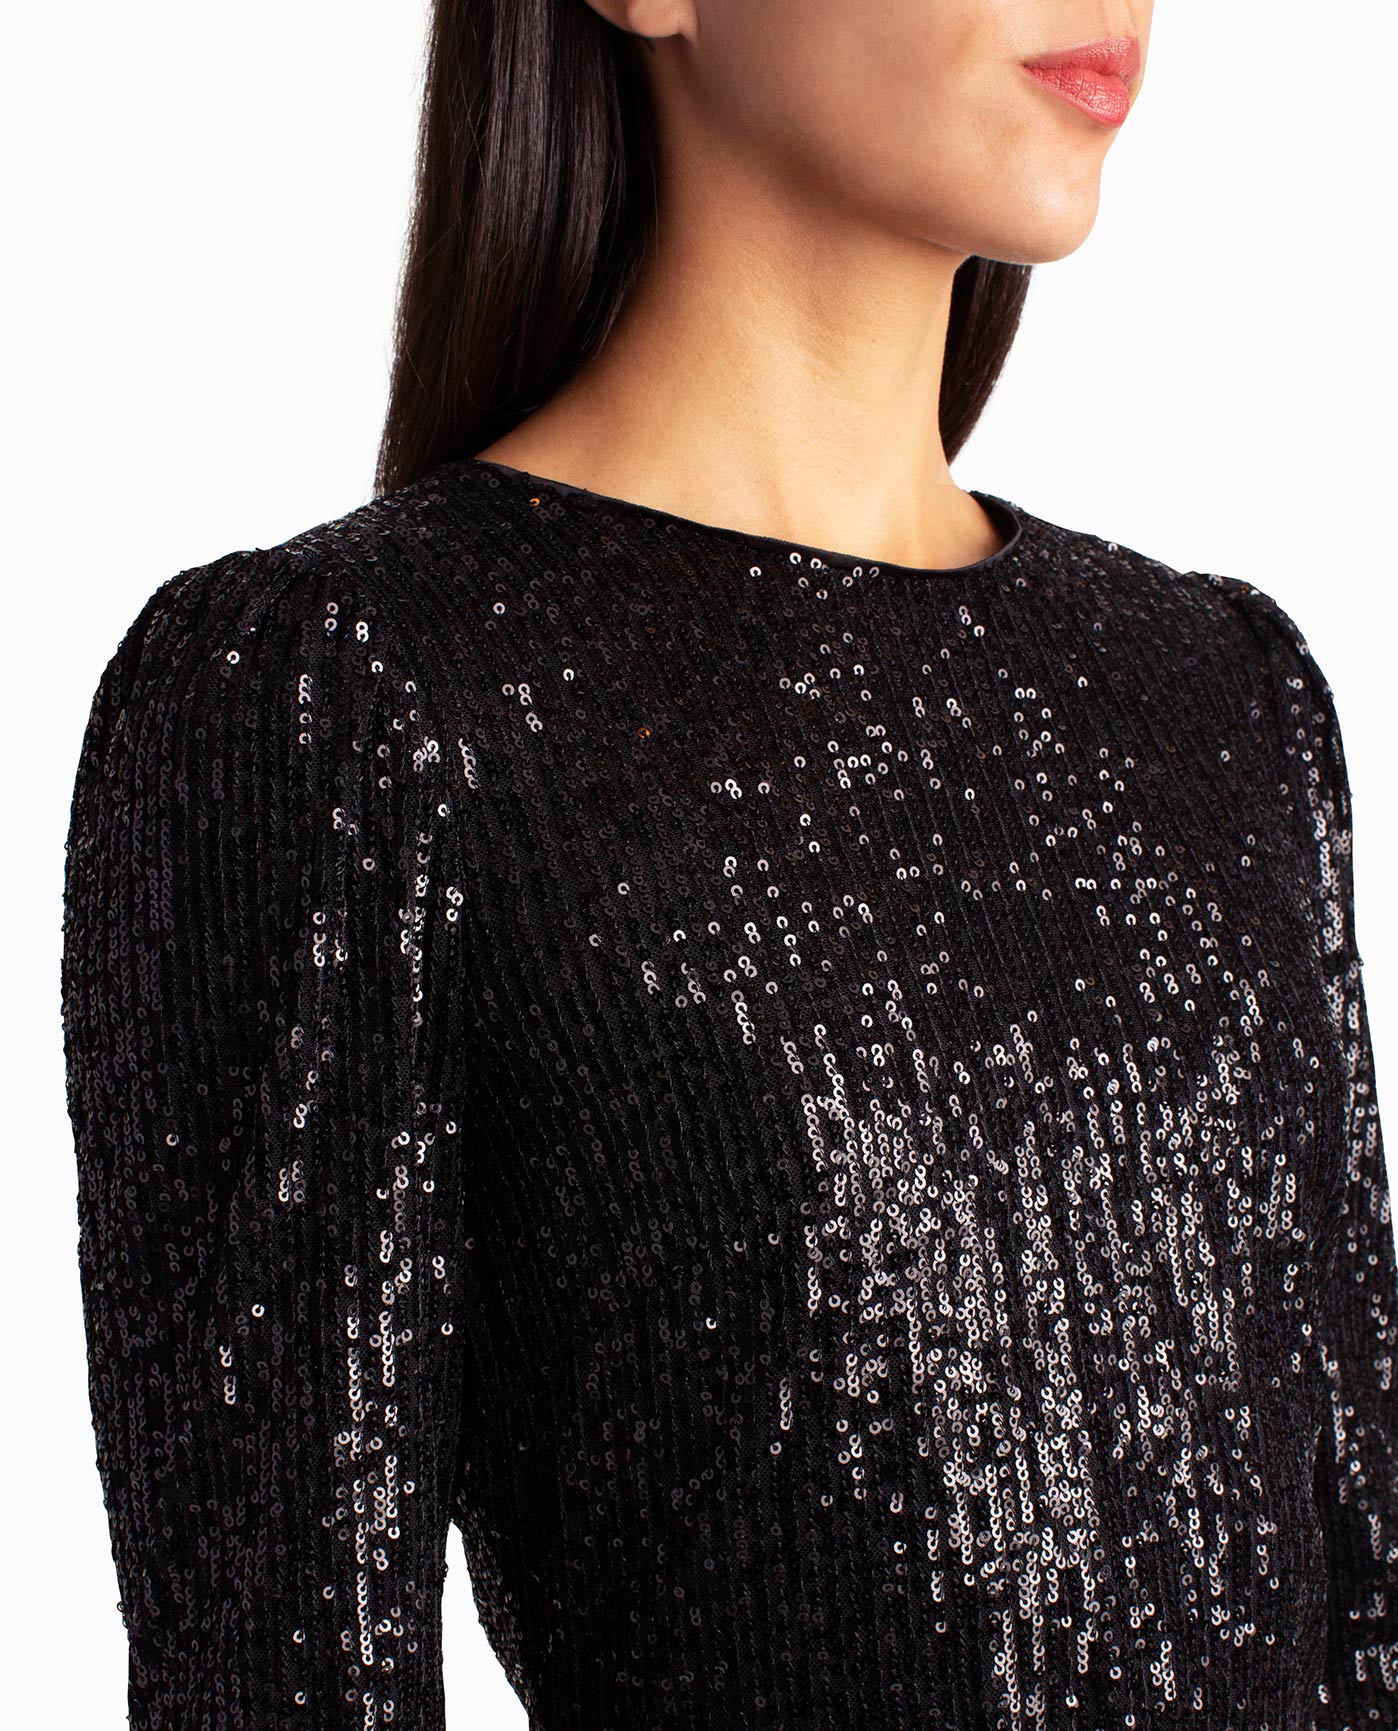 BLACK SEQUIN FABRIC AND HIGH NECKLINE | Very Black Sequins